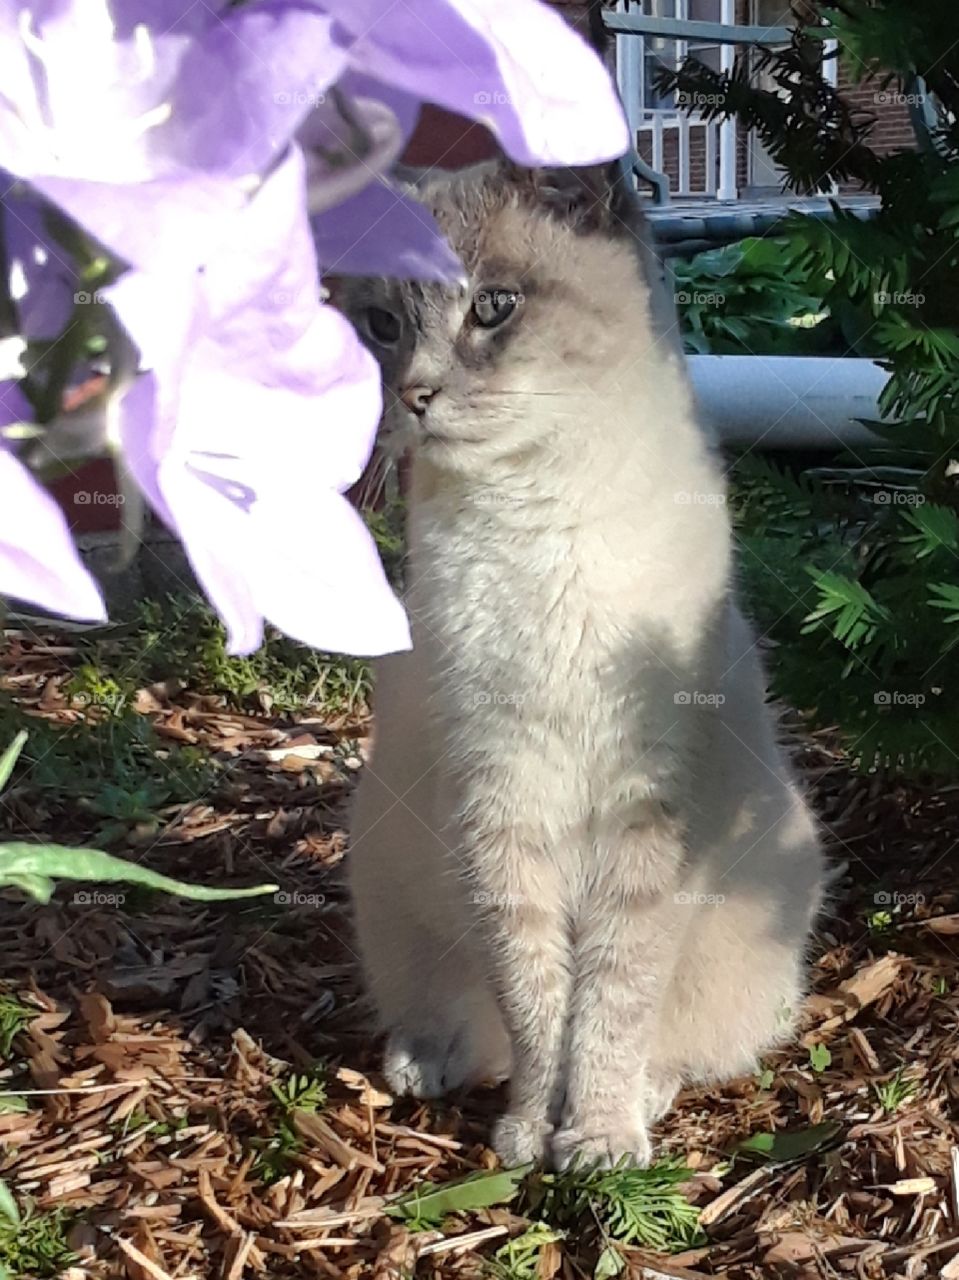 Siamese tabby cat in the garden with purple flowers